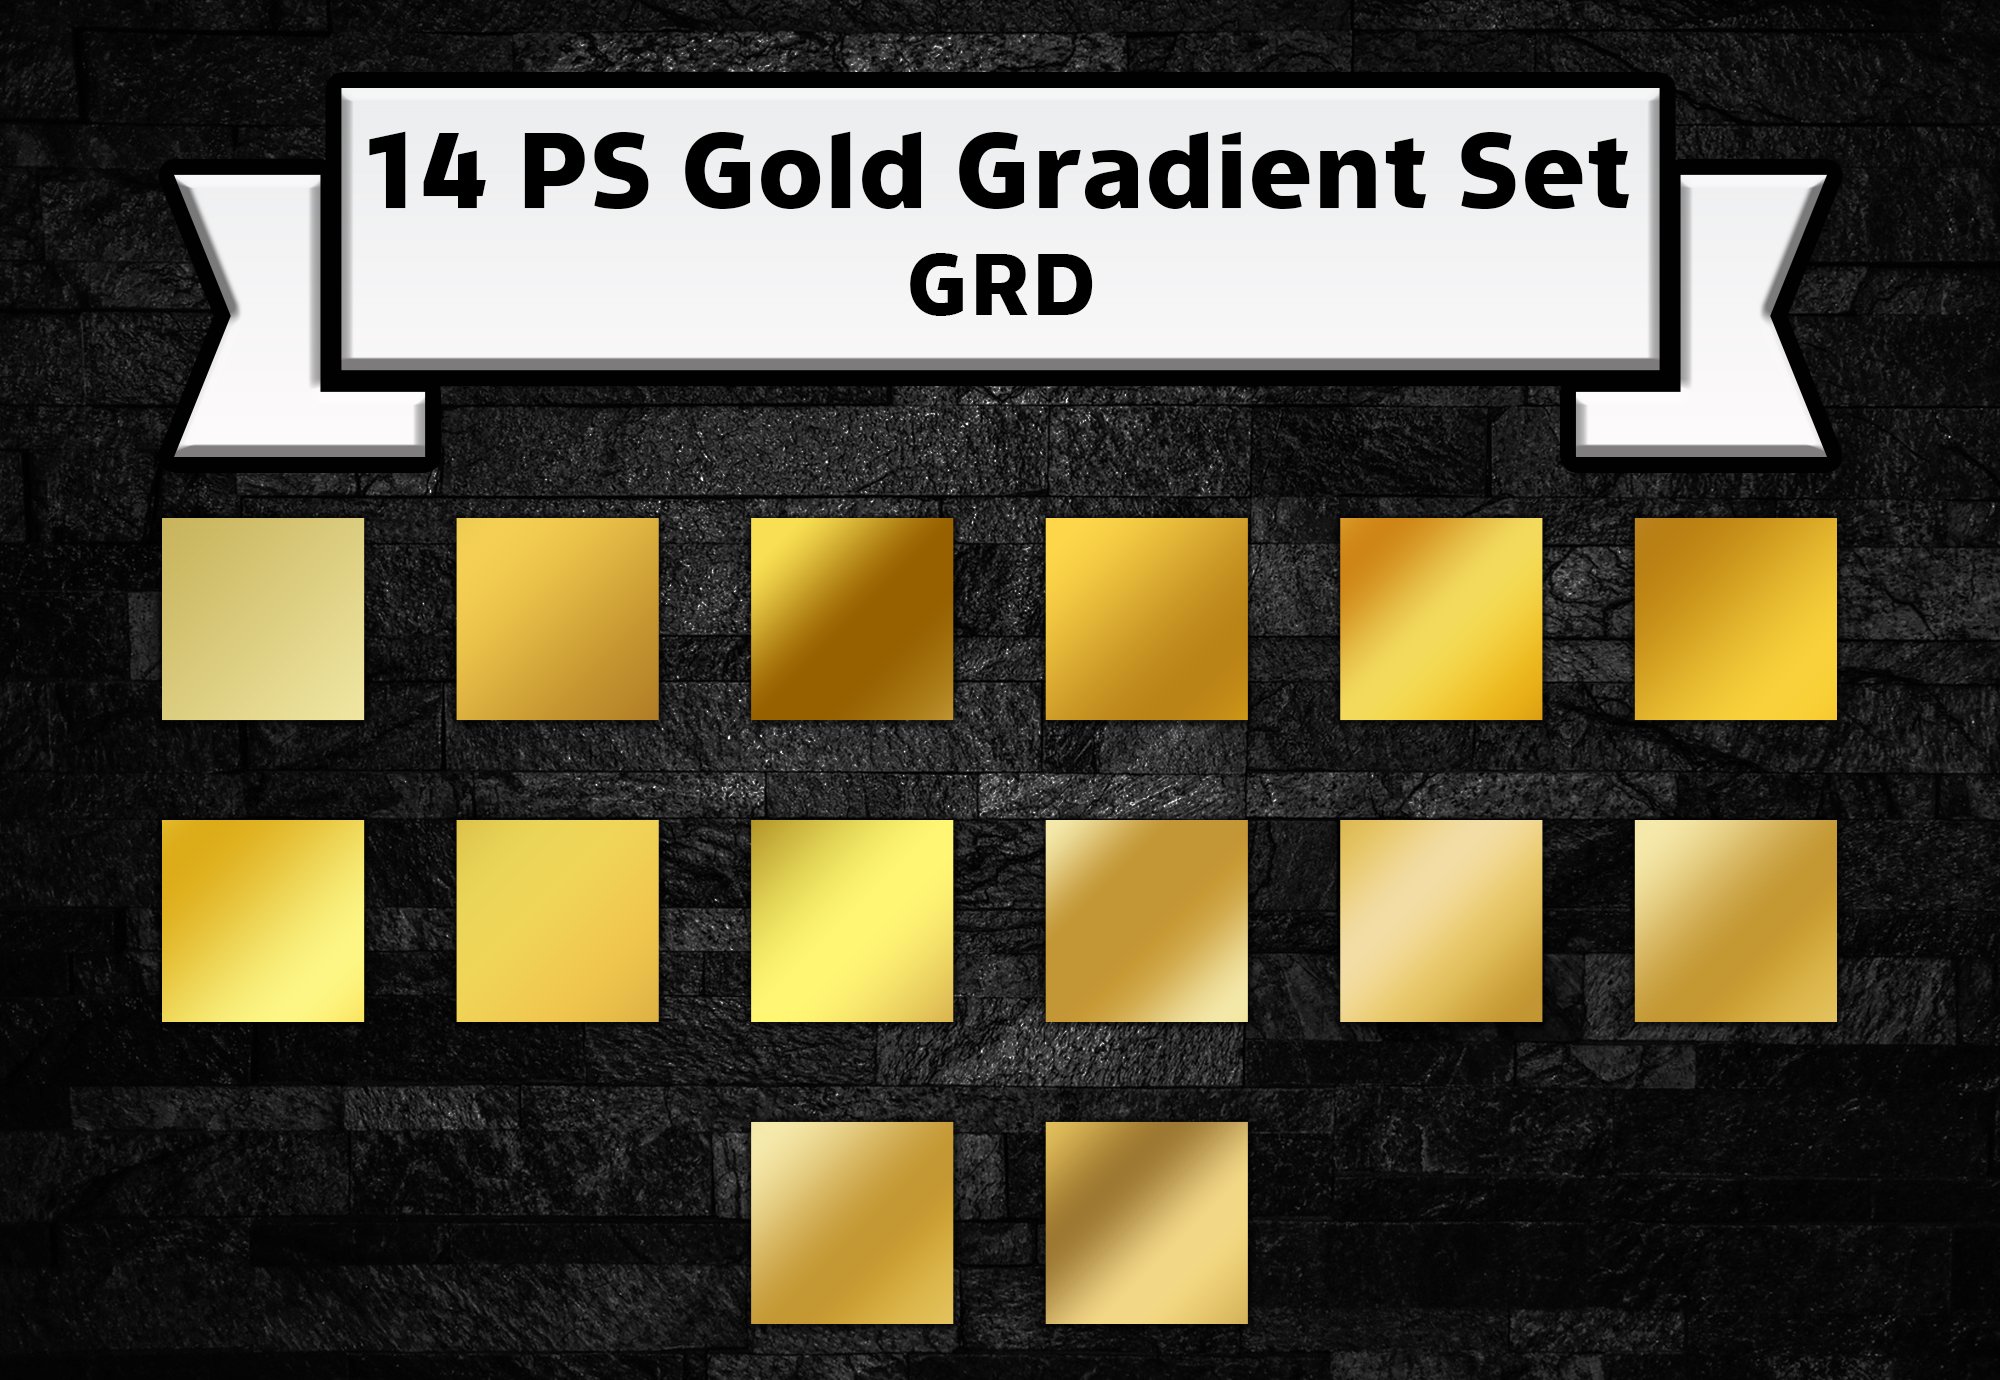 Gold gradients set for Photoshopcover image.